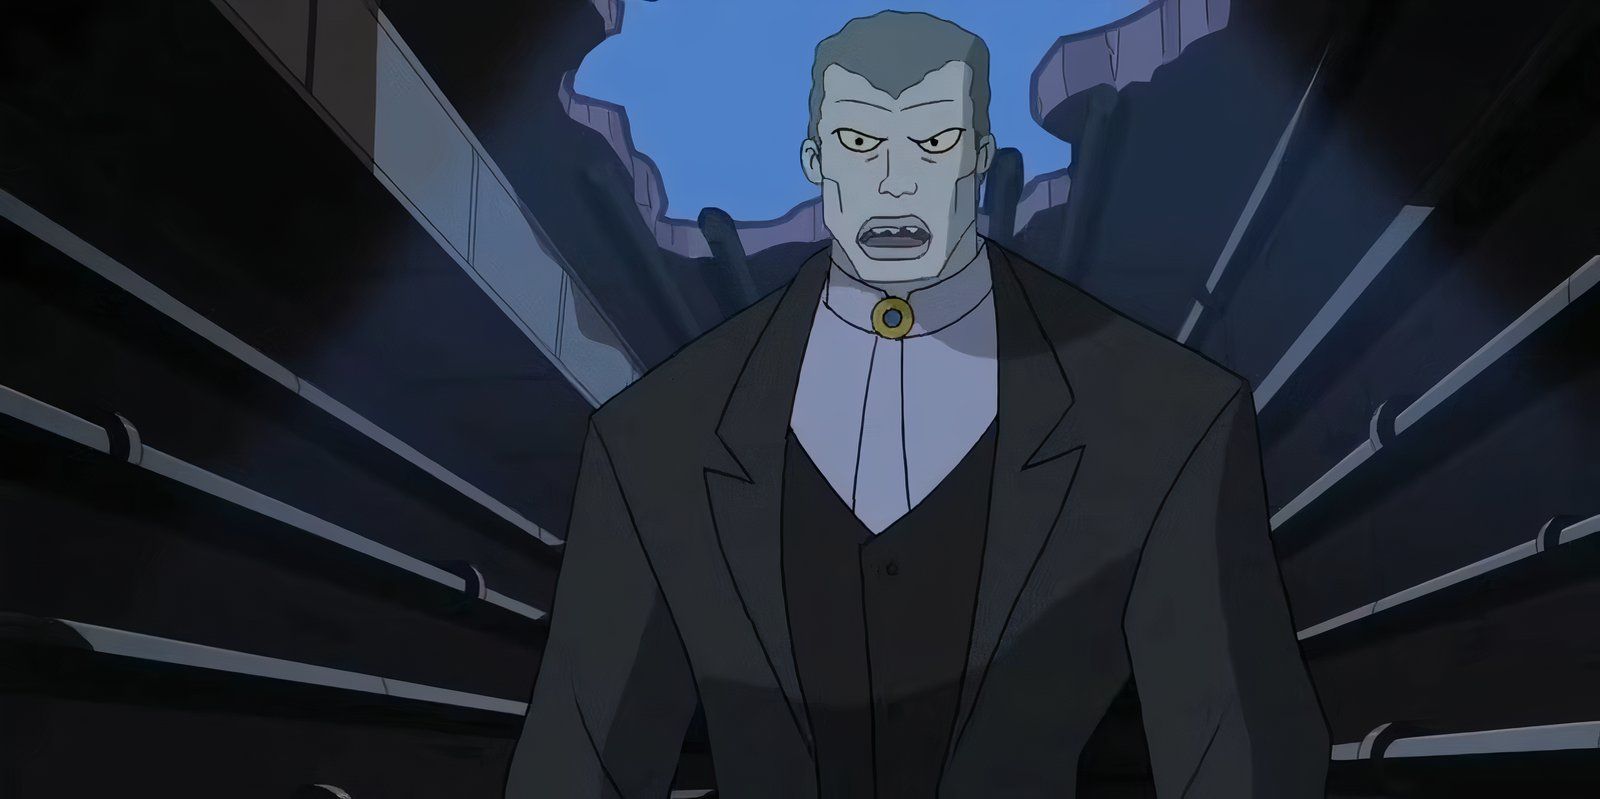 Tombstone from The Spectacular Spider-Man